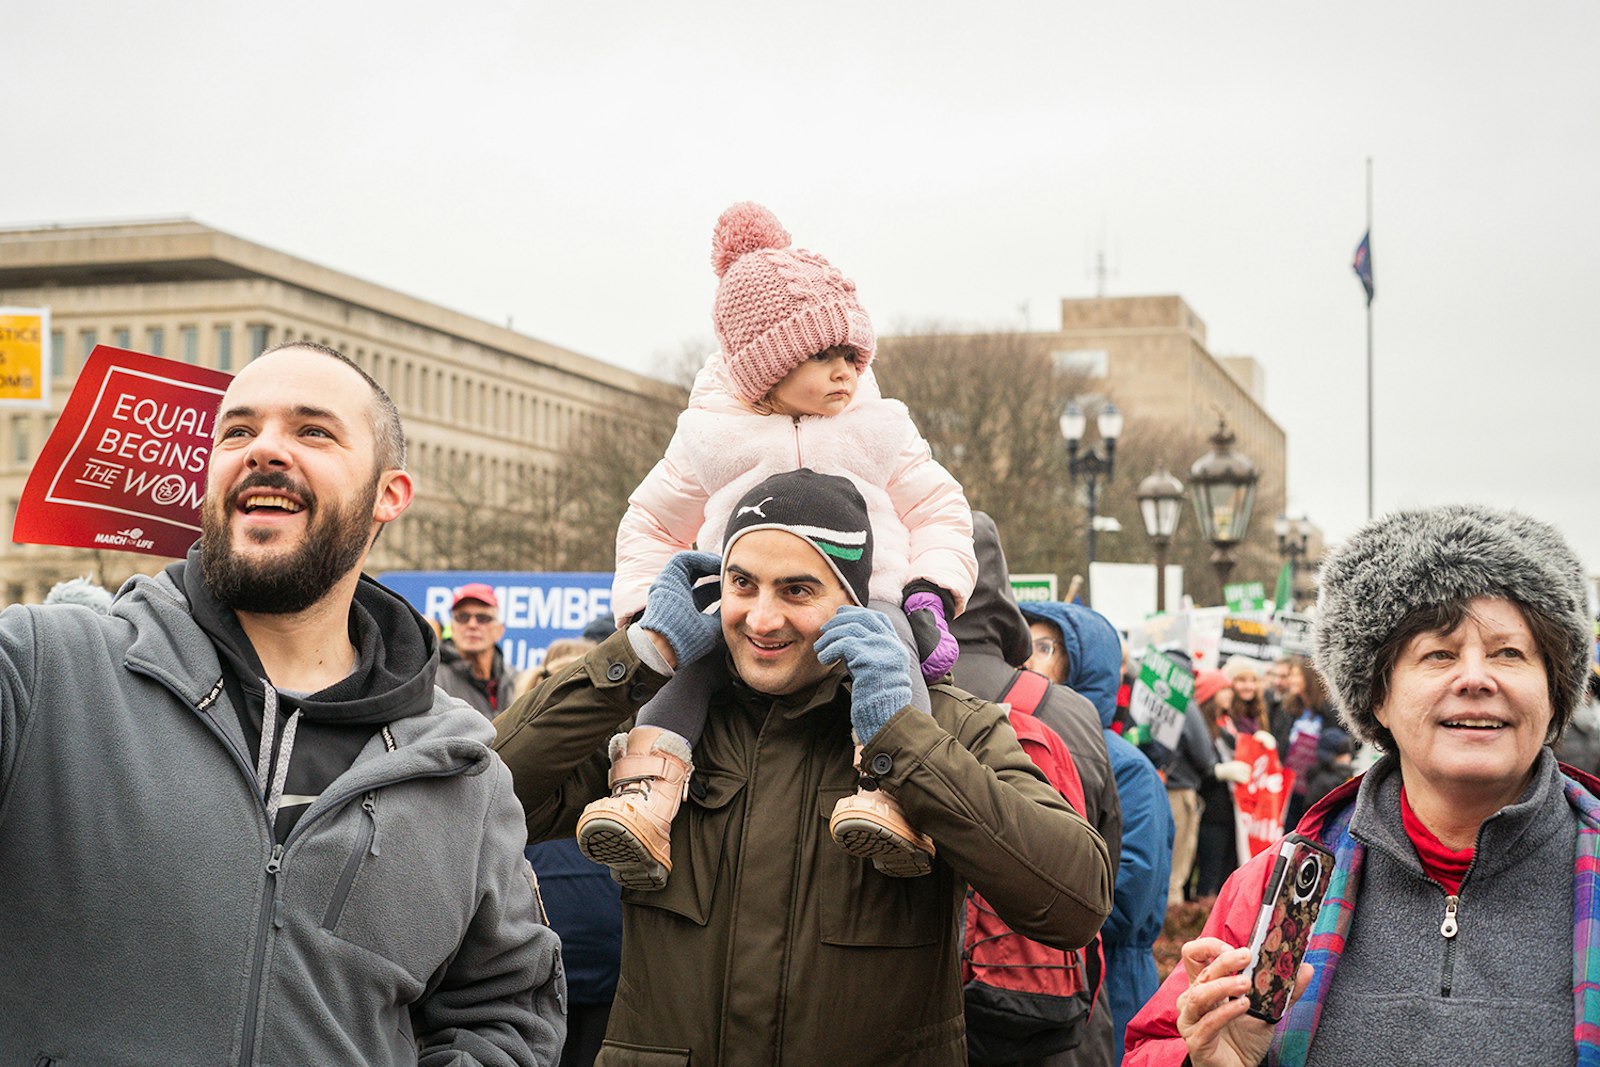 Families from across the state made their voices heard on the steps of the state Capitol as speakers including Chuck Gaidica, former anchor for WXYZ-TV (Channel 7), and Jeanne Mancini, national director of the March for Life in Washington, D.C.